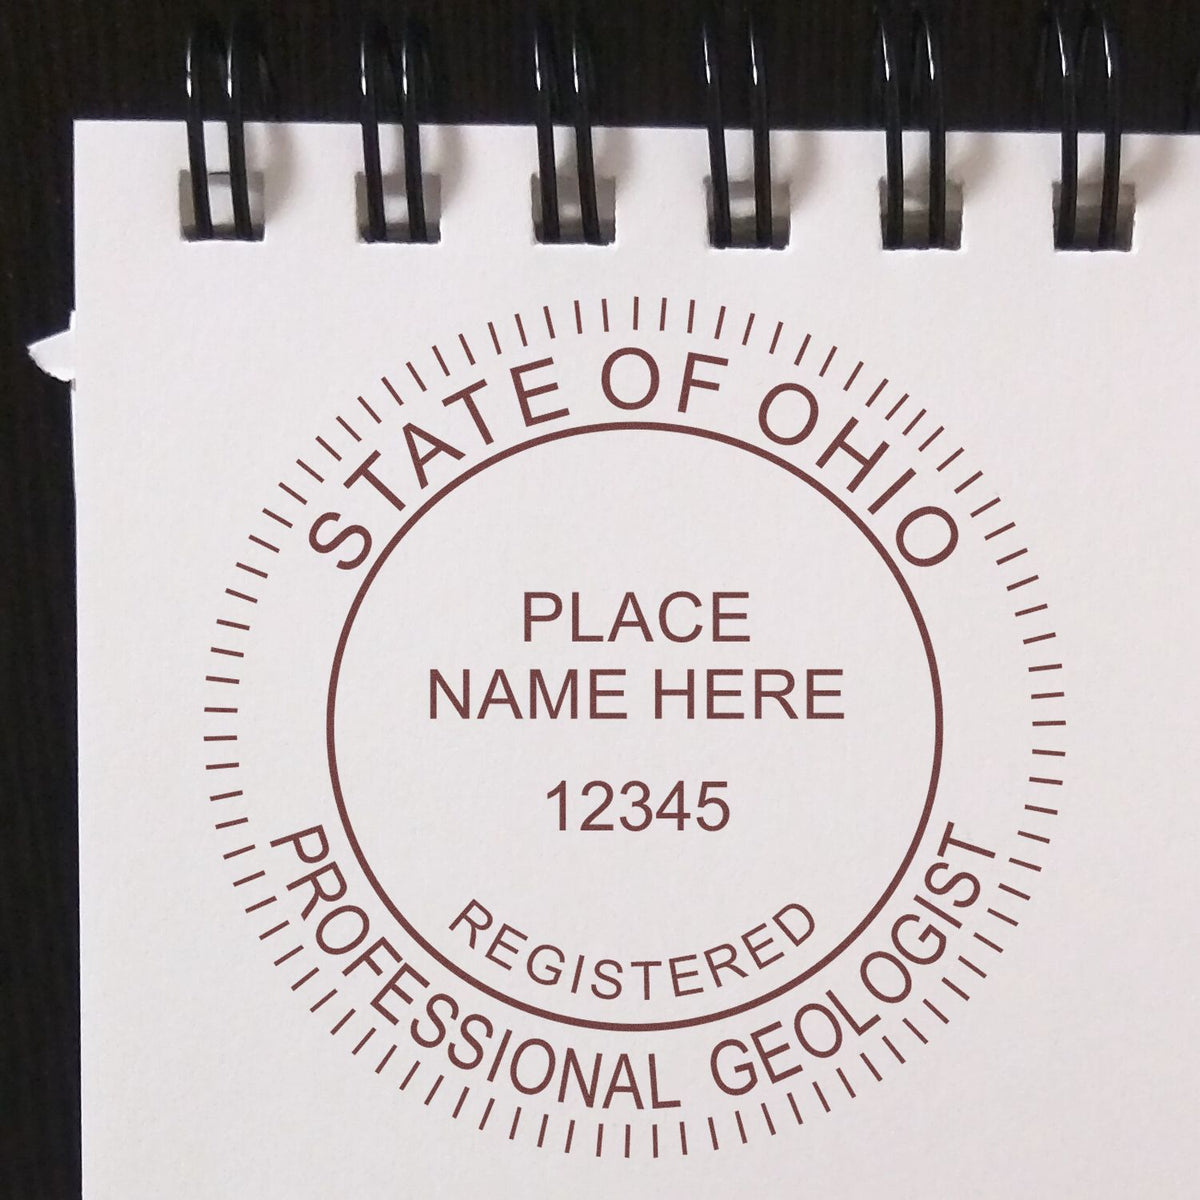 Another Example of a stamped impression of the Digital Ohio Geologist Stamp, Electronic Seal for Ohio Geologist on a office form